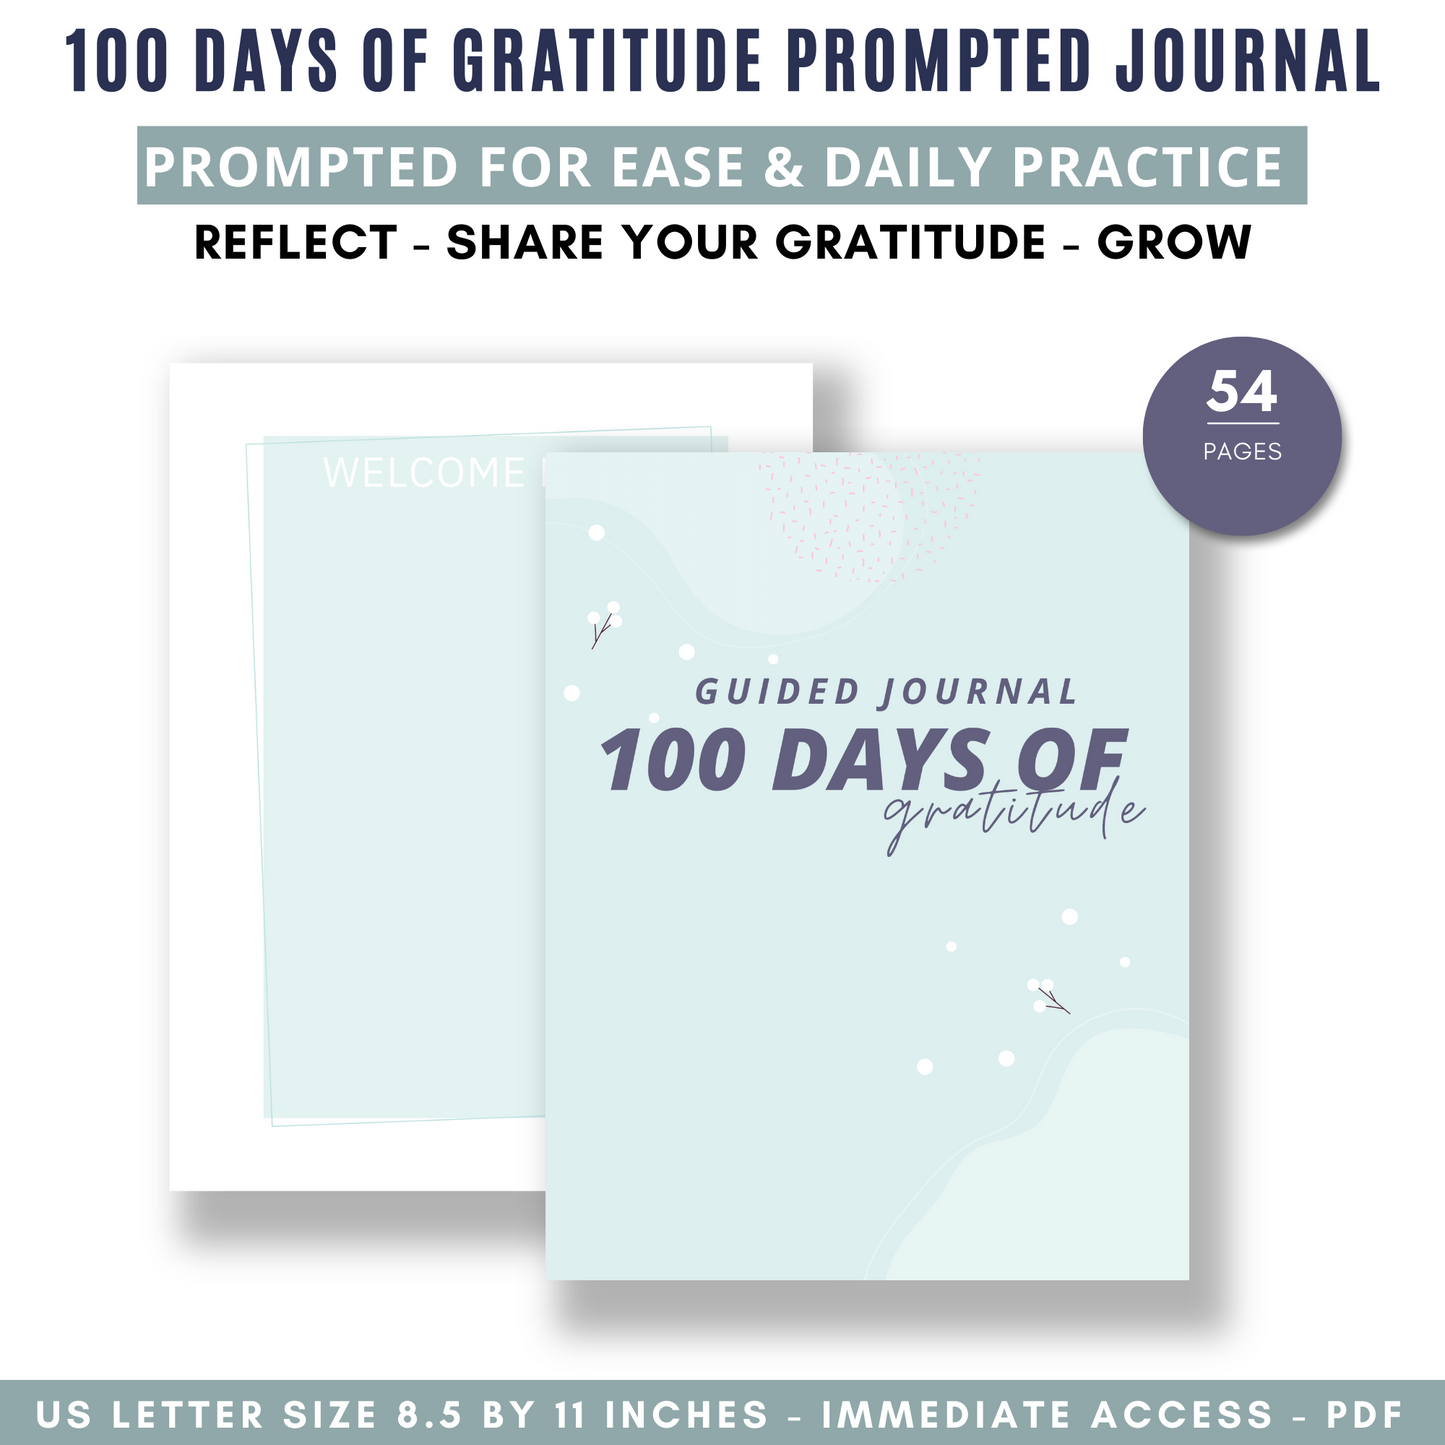 100 Days of Gratitude Prompted Journal